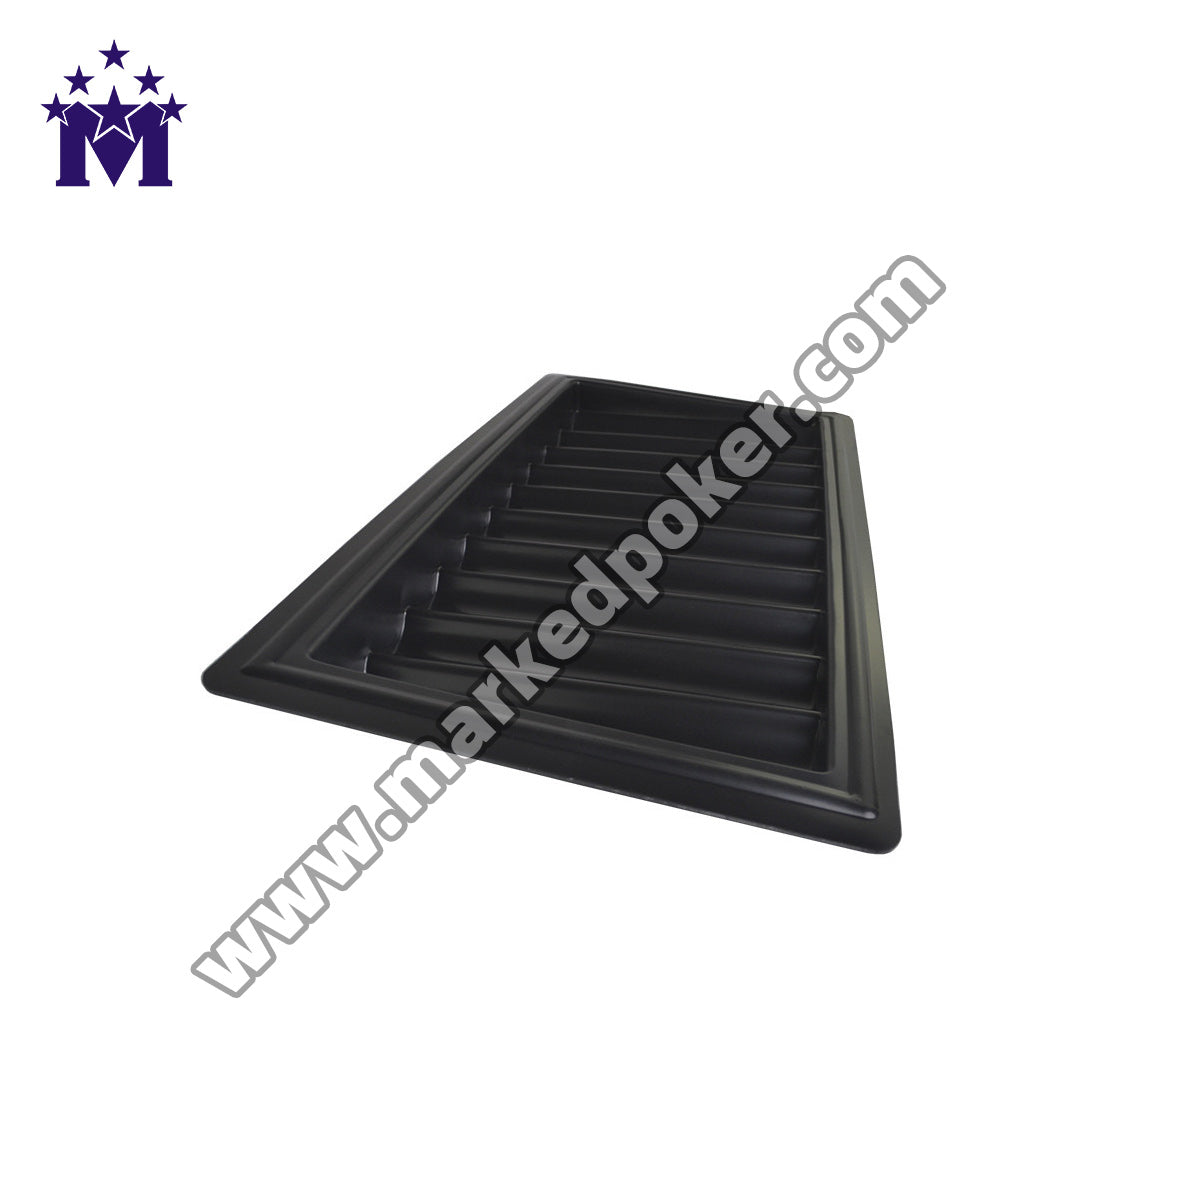 Shopping 350 Chip Tray Marked Playing Cards Scanning Camera